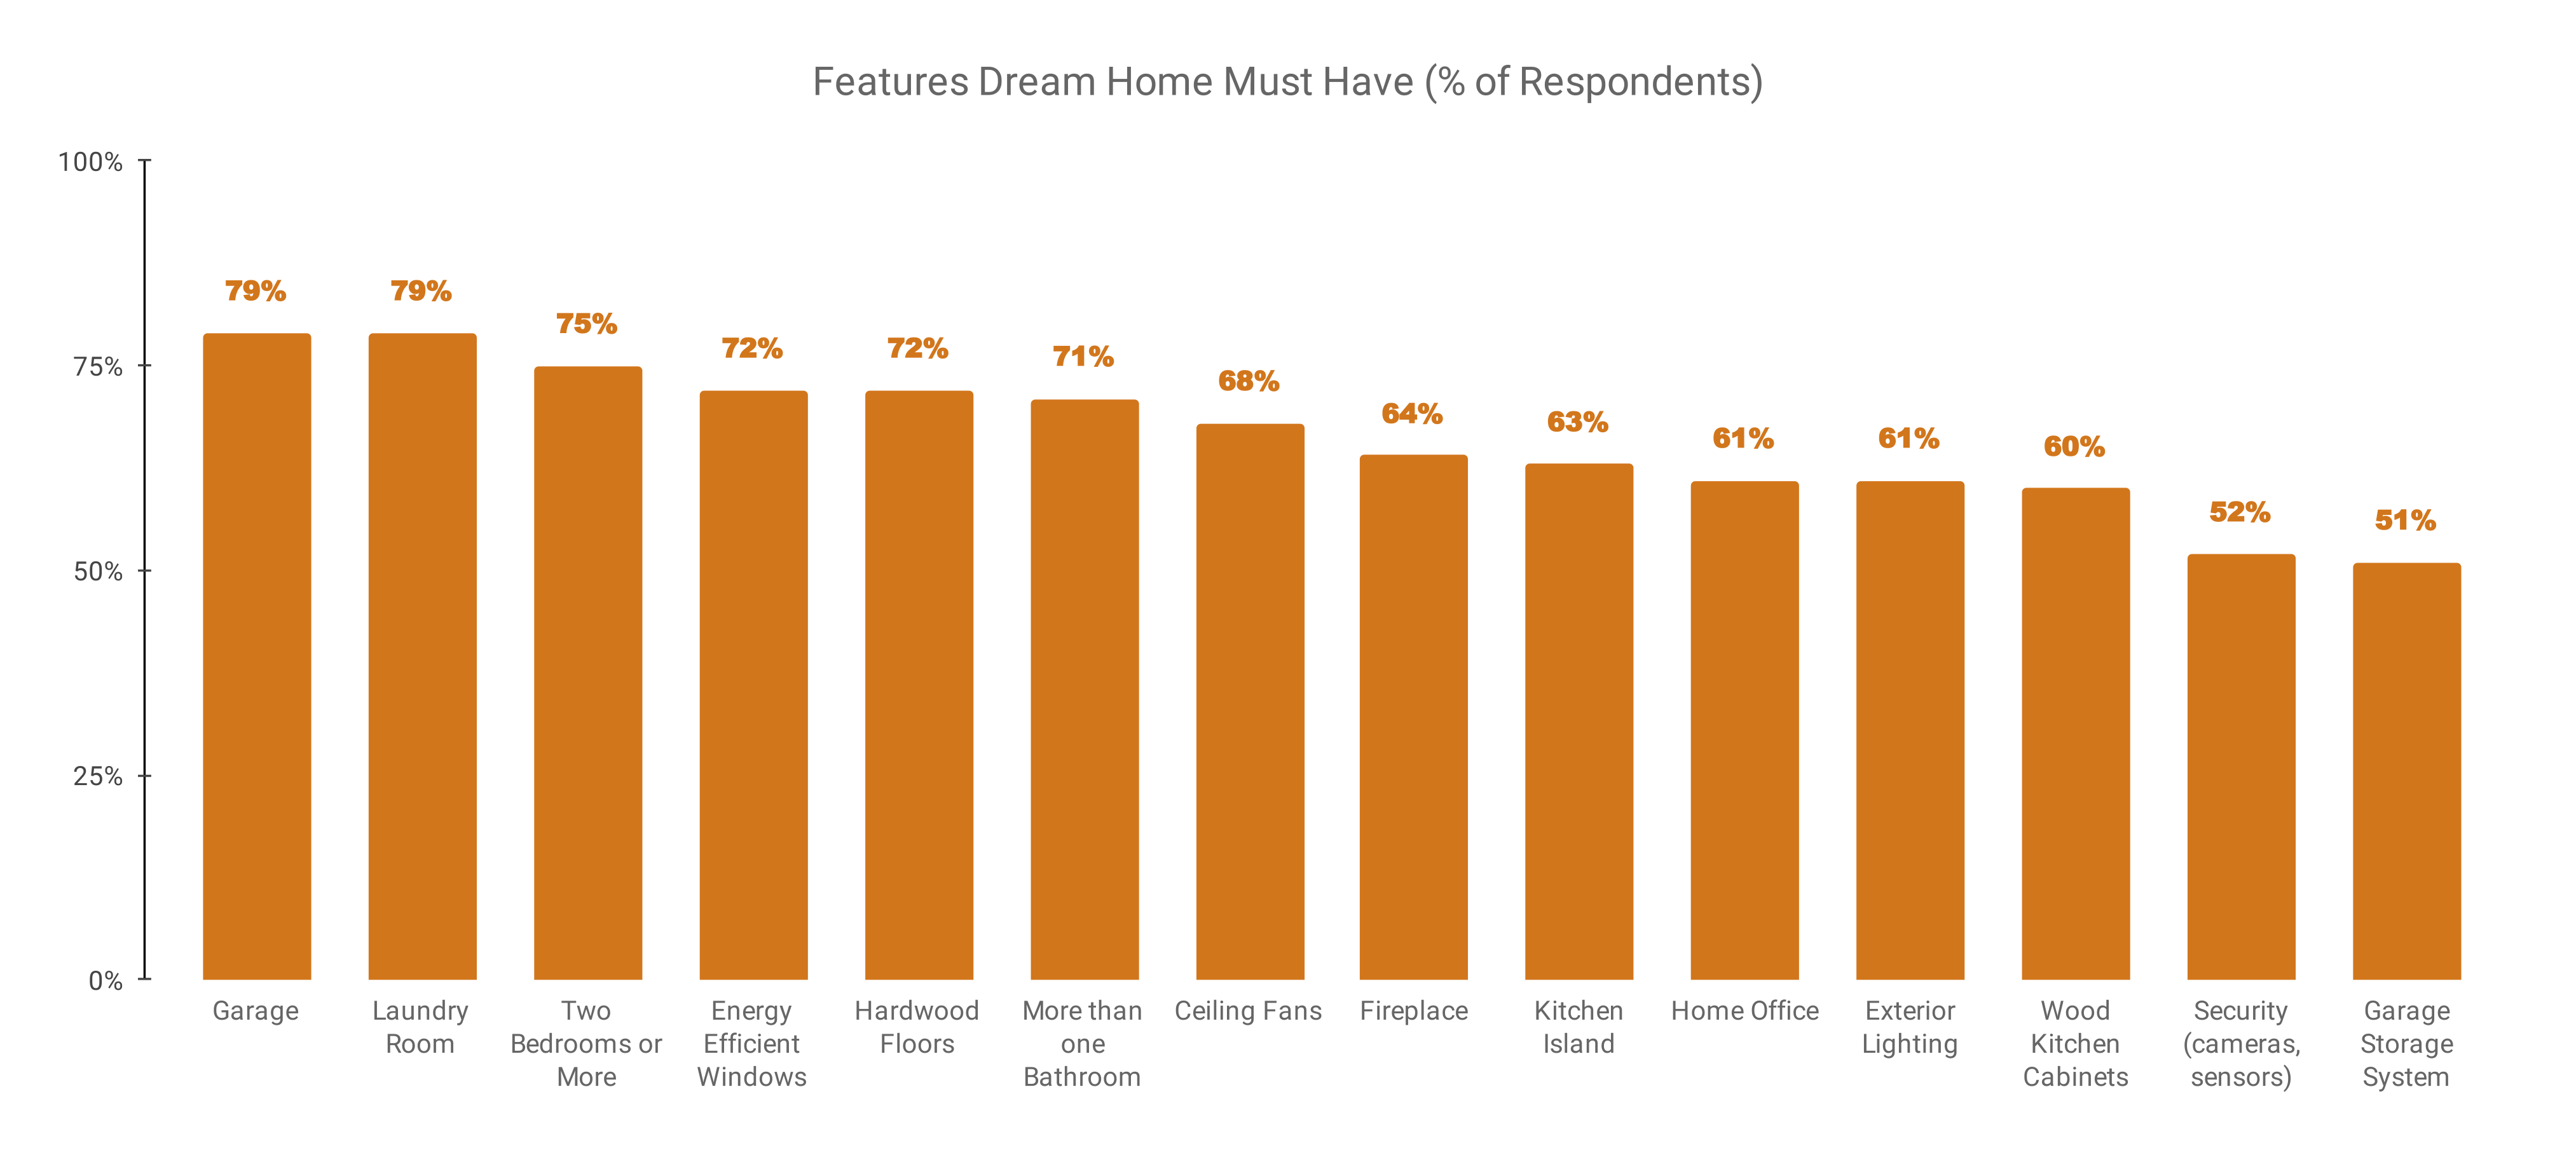 AIM study features dream home must have